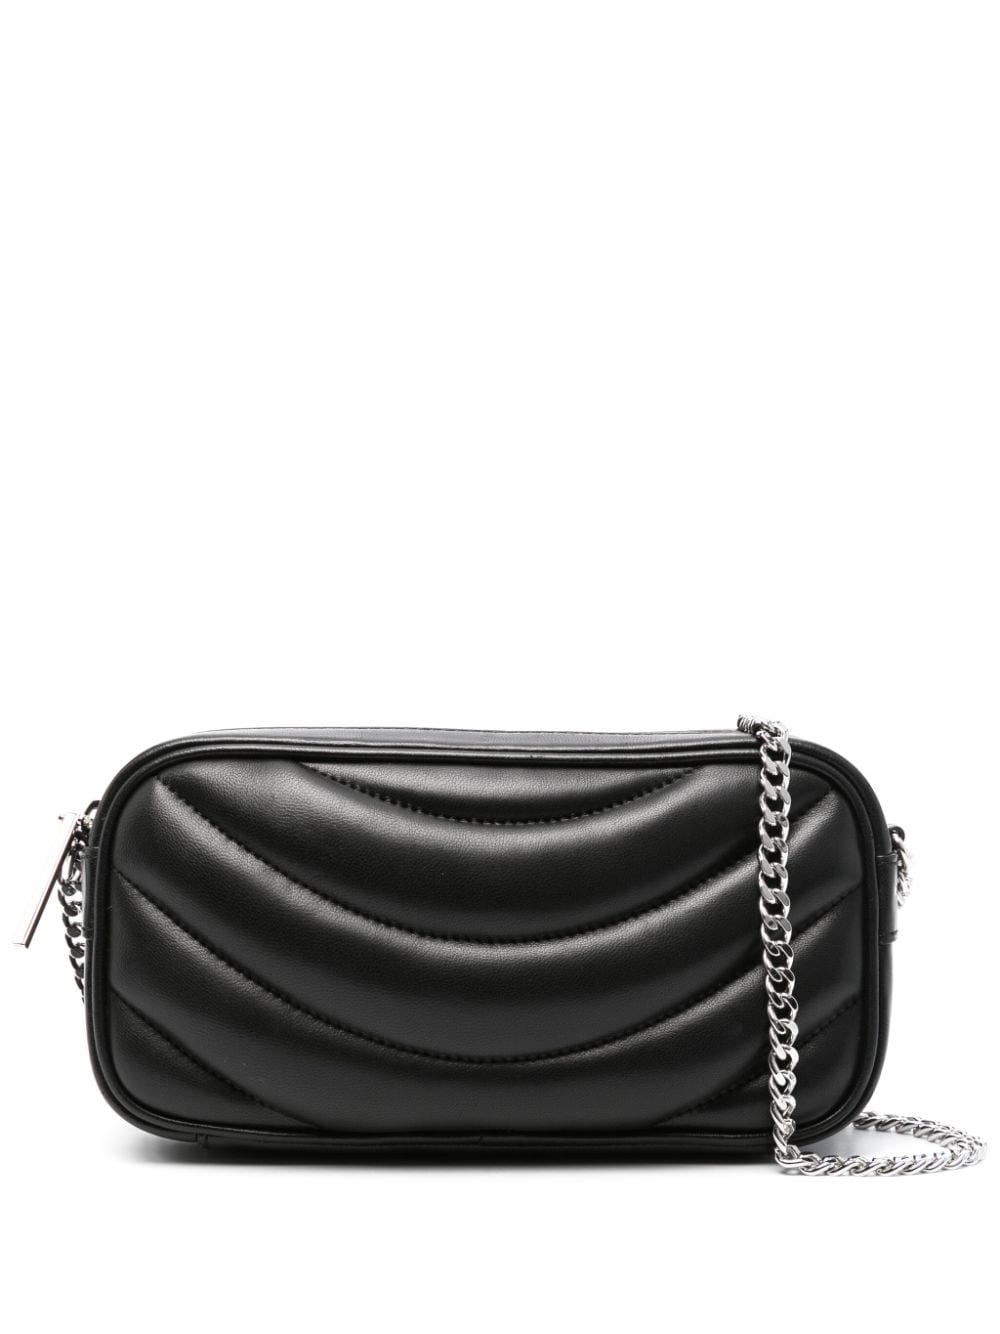 Claudie Pierlot quilted leather shoulder bag - Nero